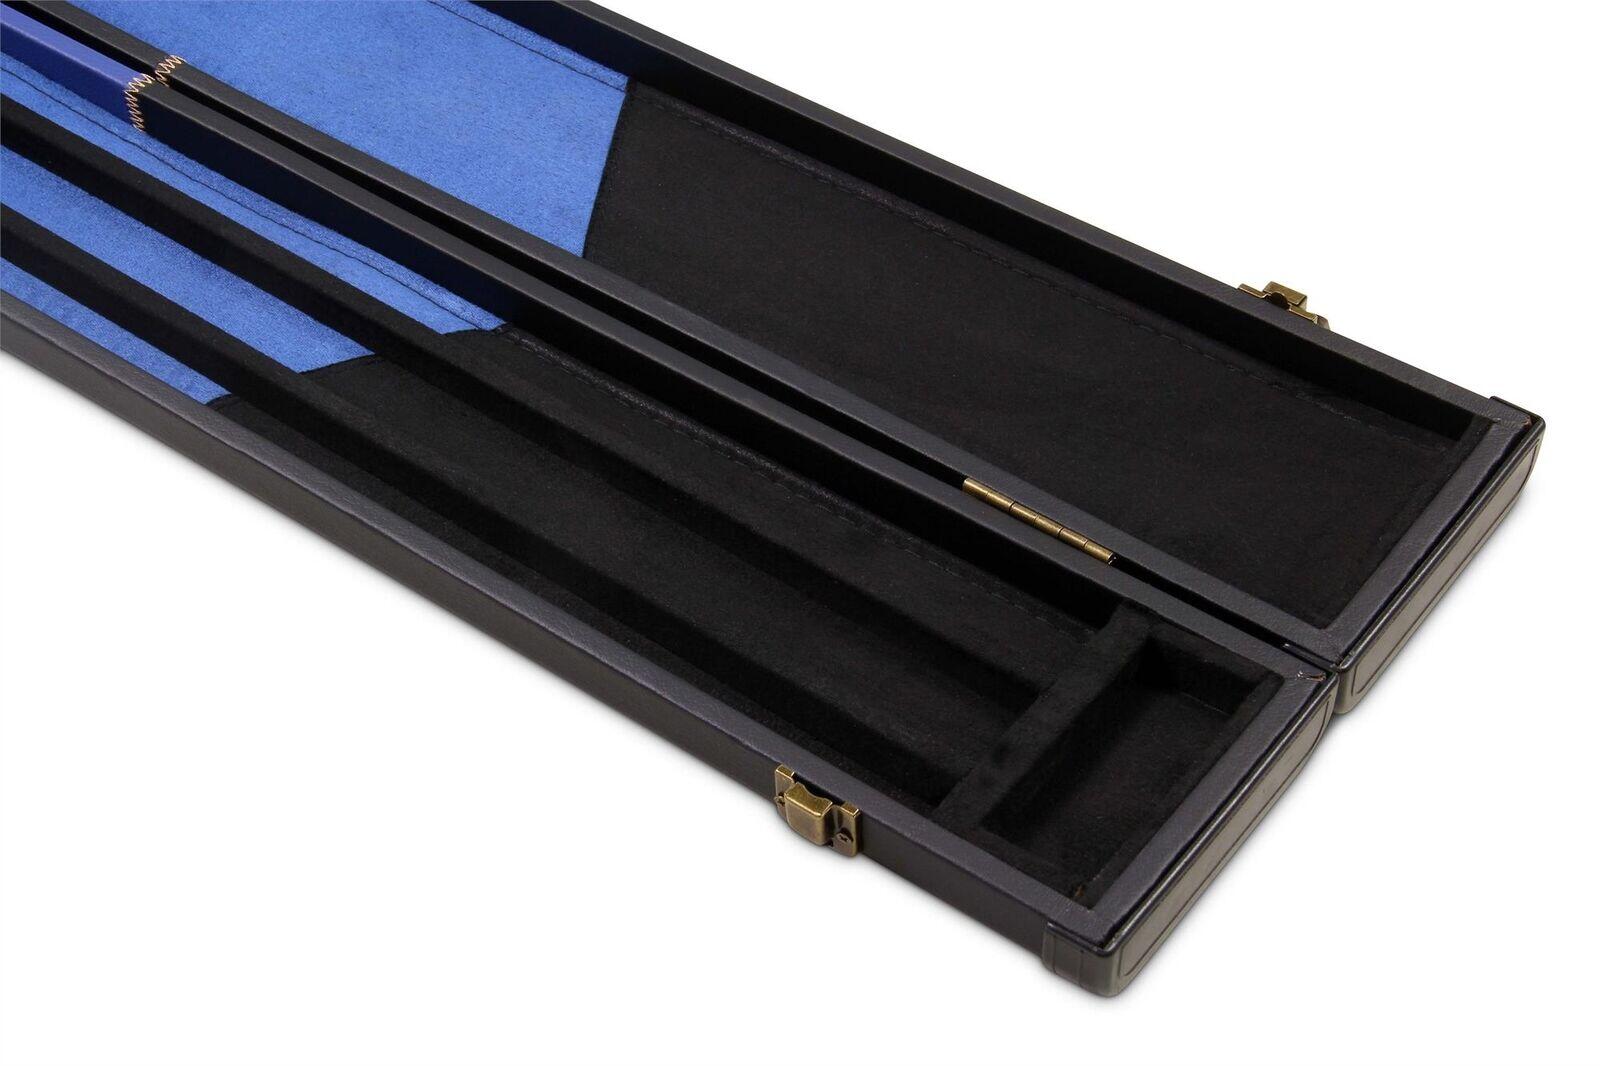 Deluxe 1 Piece WIDE BLUE CHEQUERED Snooker Pool Cue Case - Holds 3 Cues 4/7